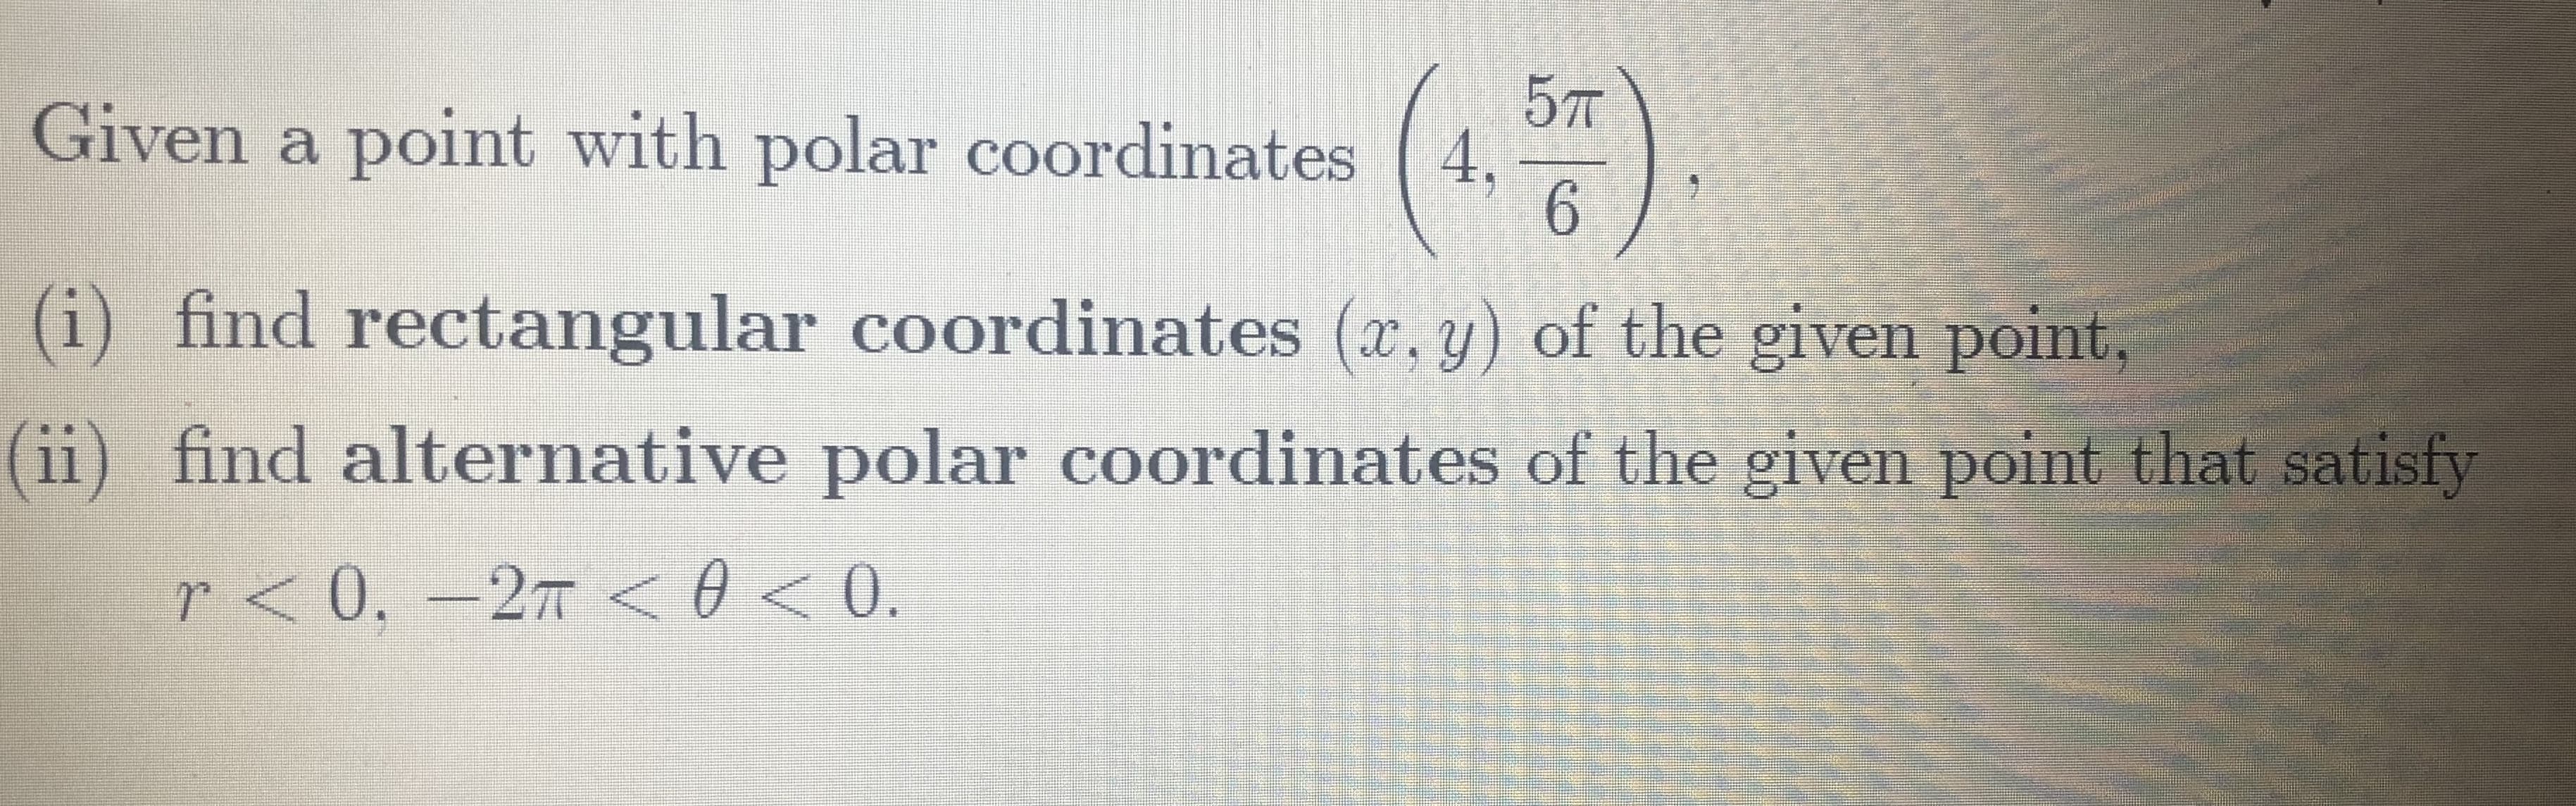 5T
(4,
6.
Given a point with polar coordinates
(i) find rectangular coordinates (x, y) of the given point,
